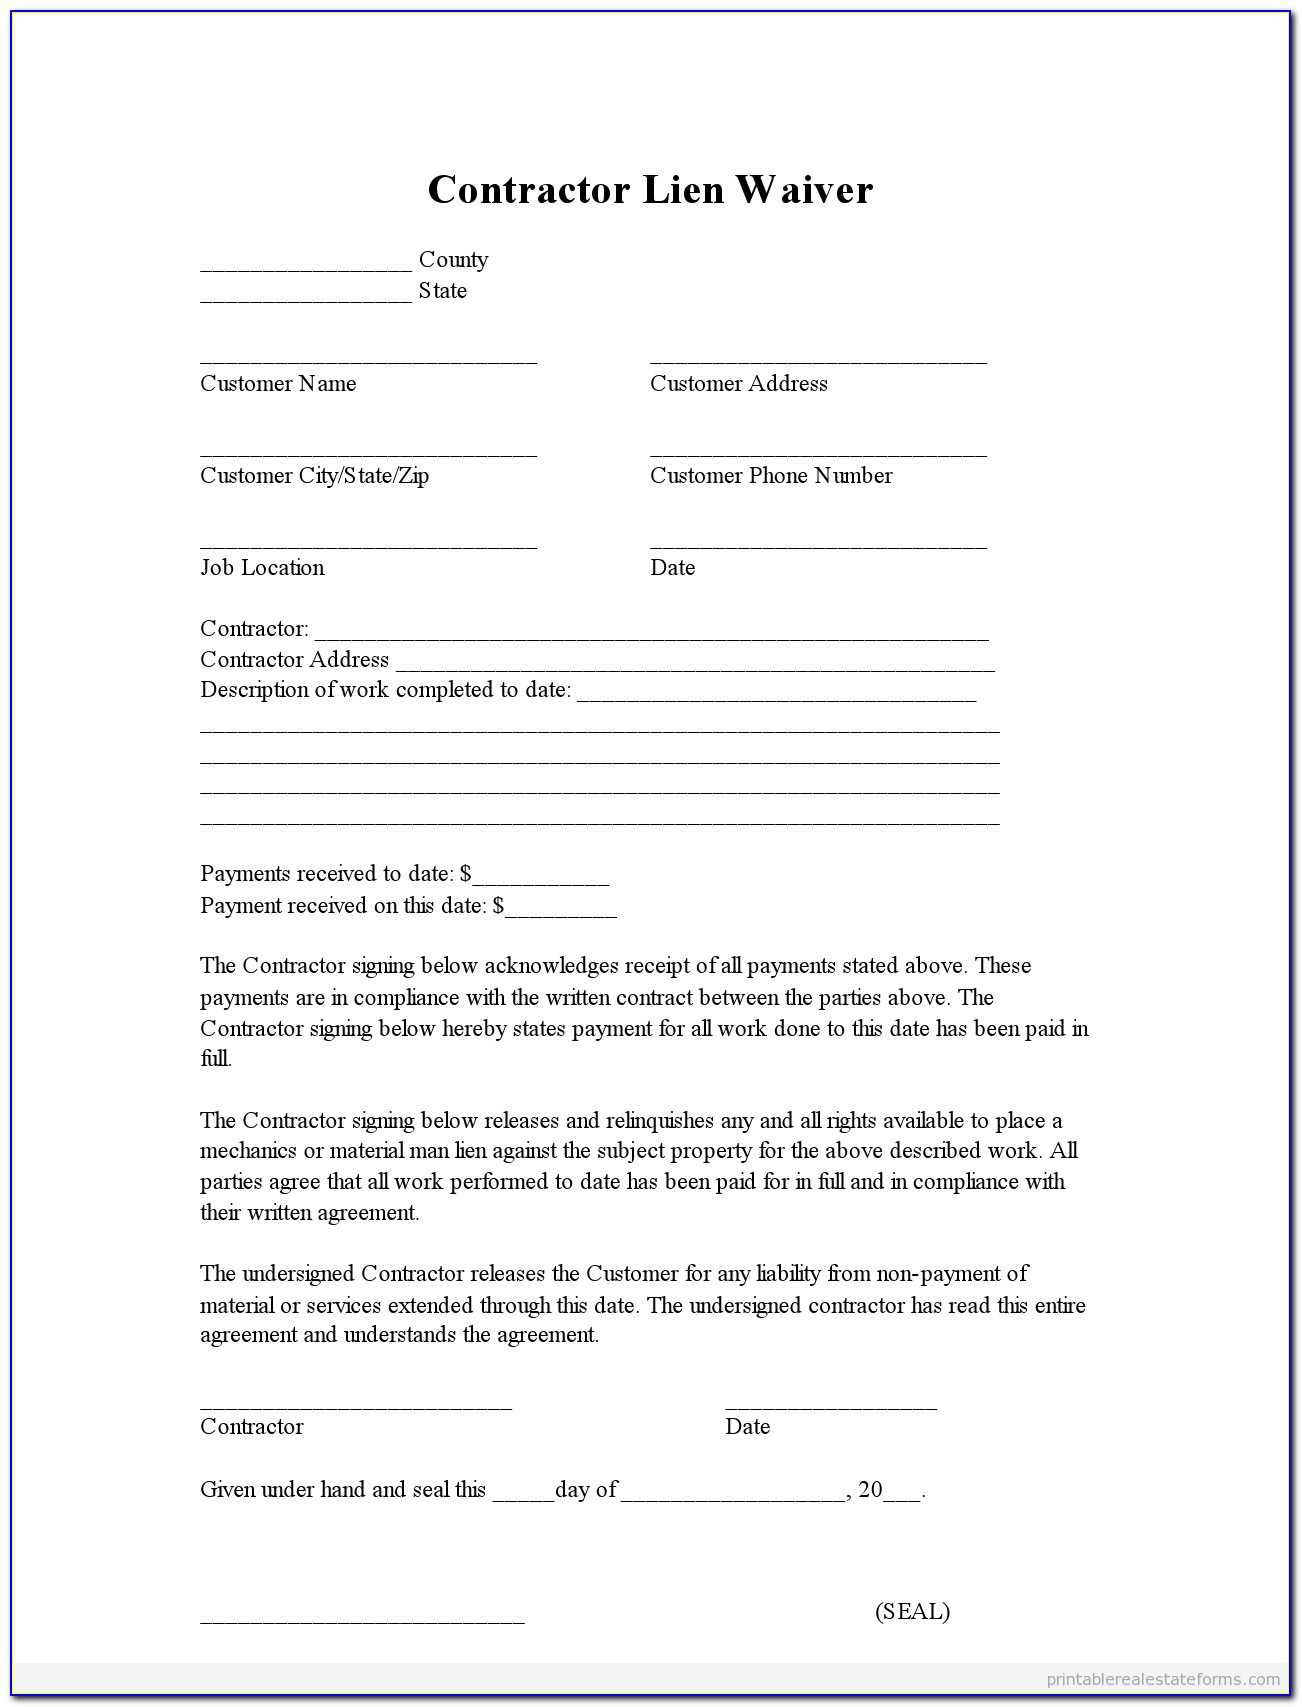 Construction Lien Waiver Form Free